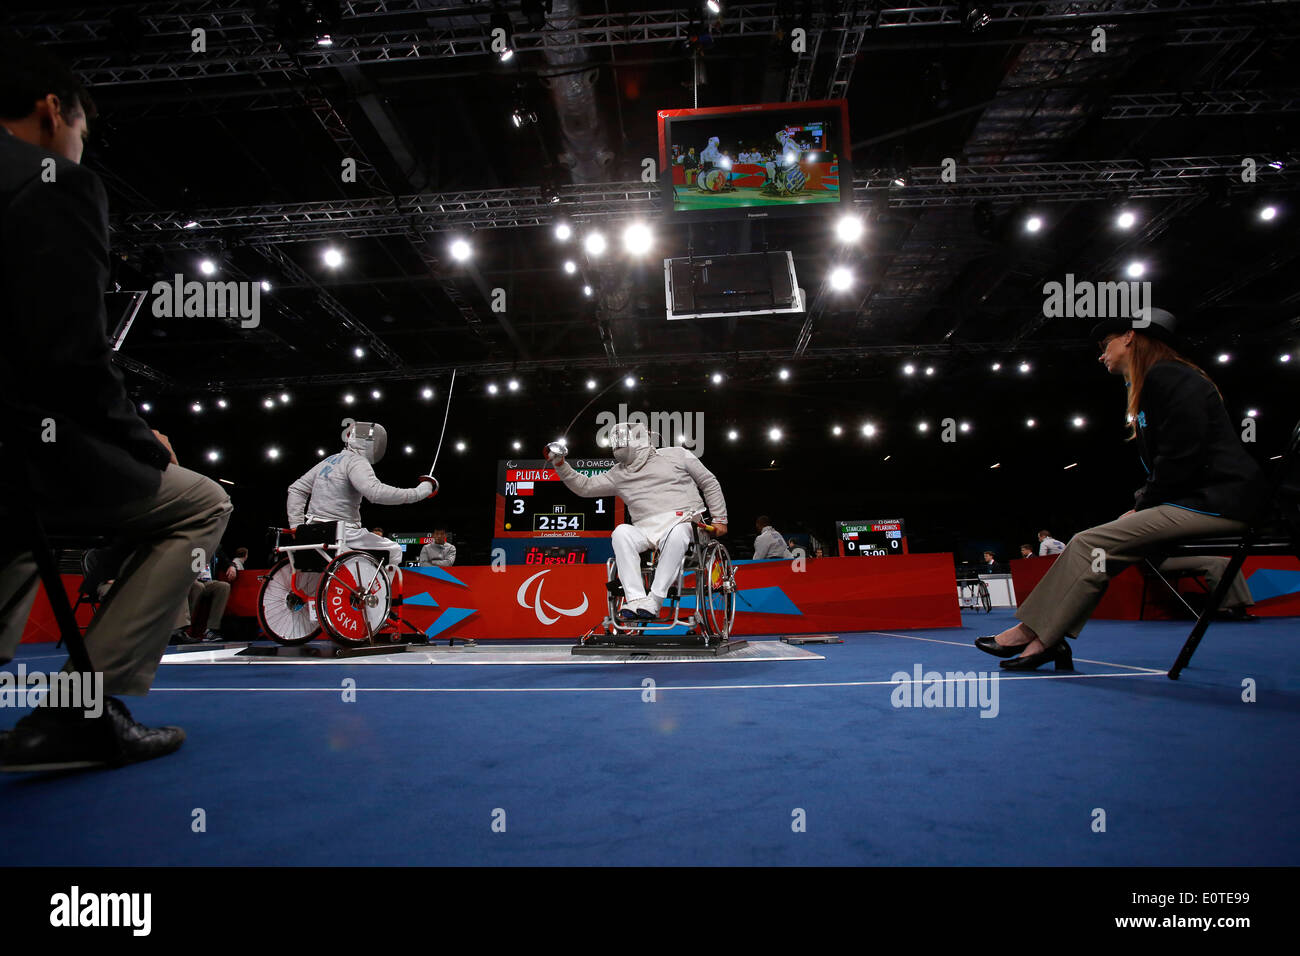 Grzegorz Pluta of Poland (L) competes against Carlos Soler Marquez of Spain during the Men's Individual Sabre - Category B wheelchair fencing at the Excel Center during the London 2012 Paralympic Games in London, Britain, 06 September 2012. Pluta won 5-2 Stock Photo